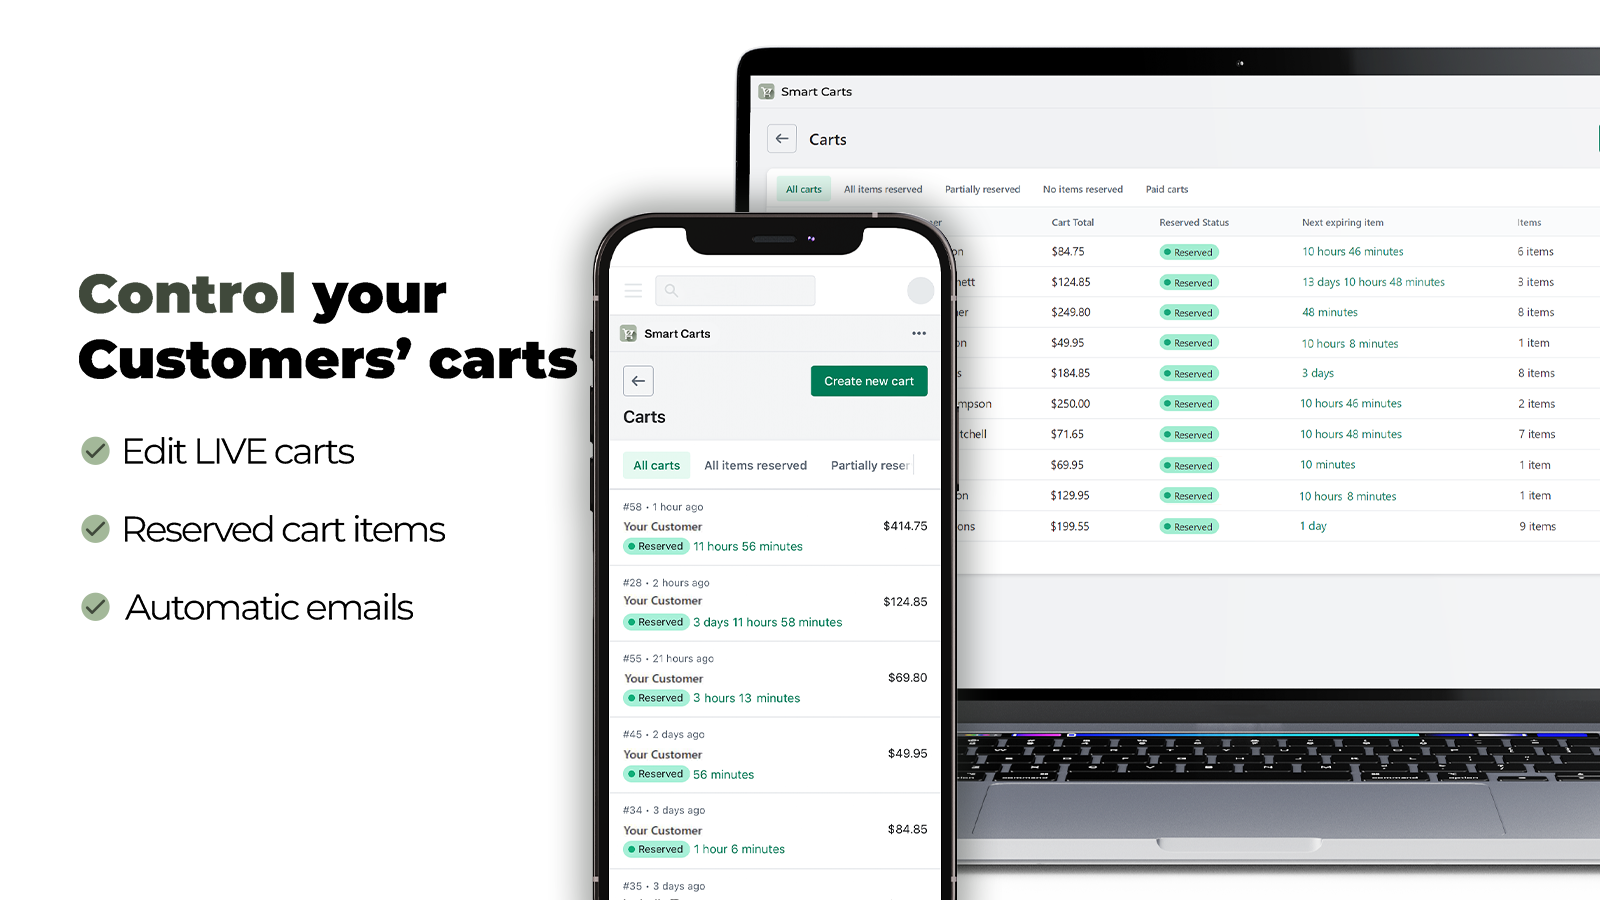 Smart Carts - Edit/Reserve carts, automated emails Simplify Apps